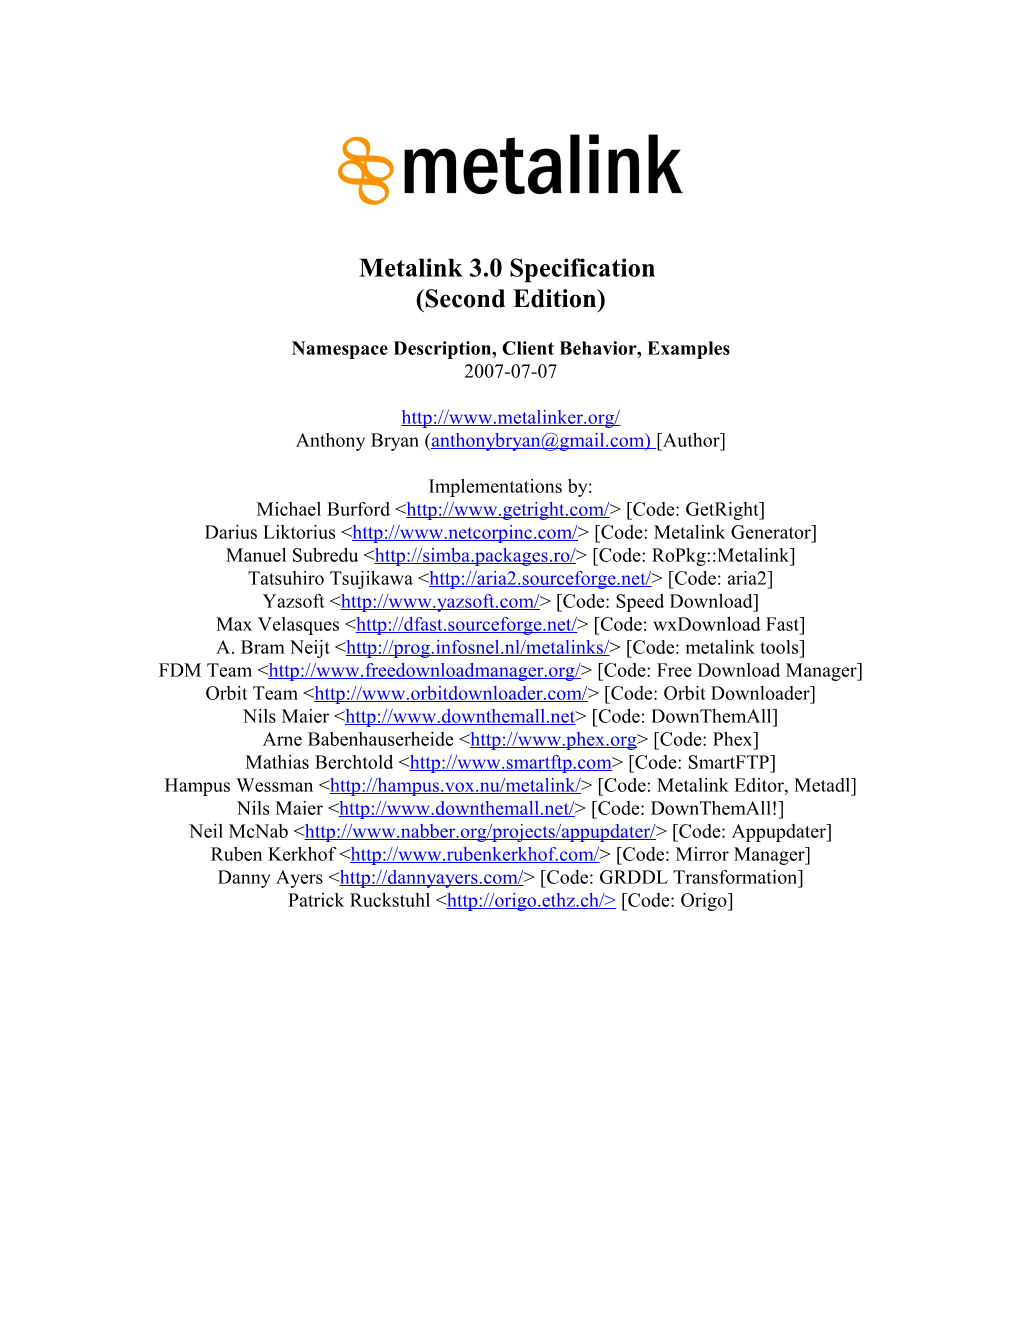 Metalink 3.0 Specification (Second Edition)